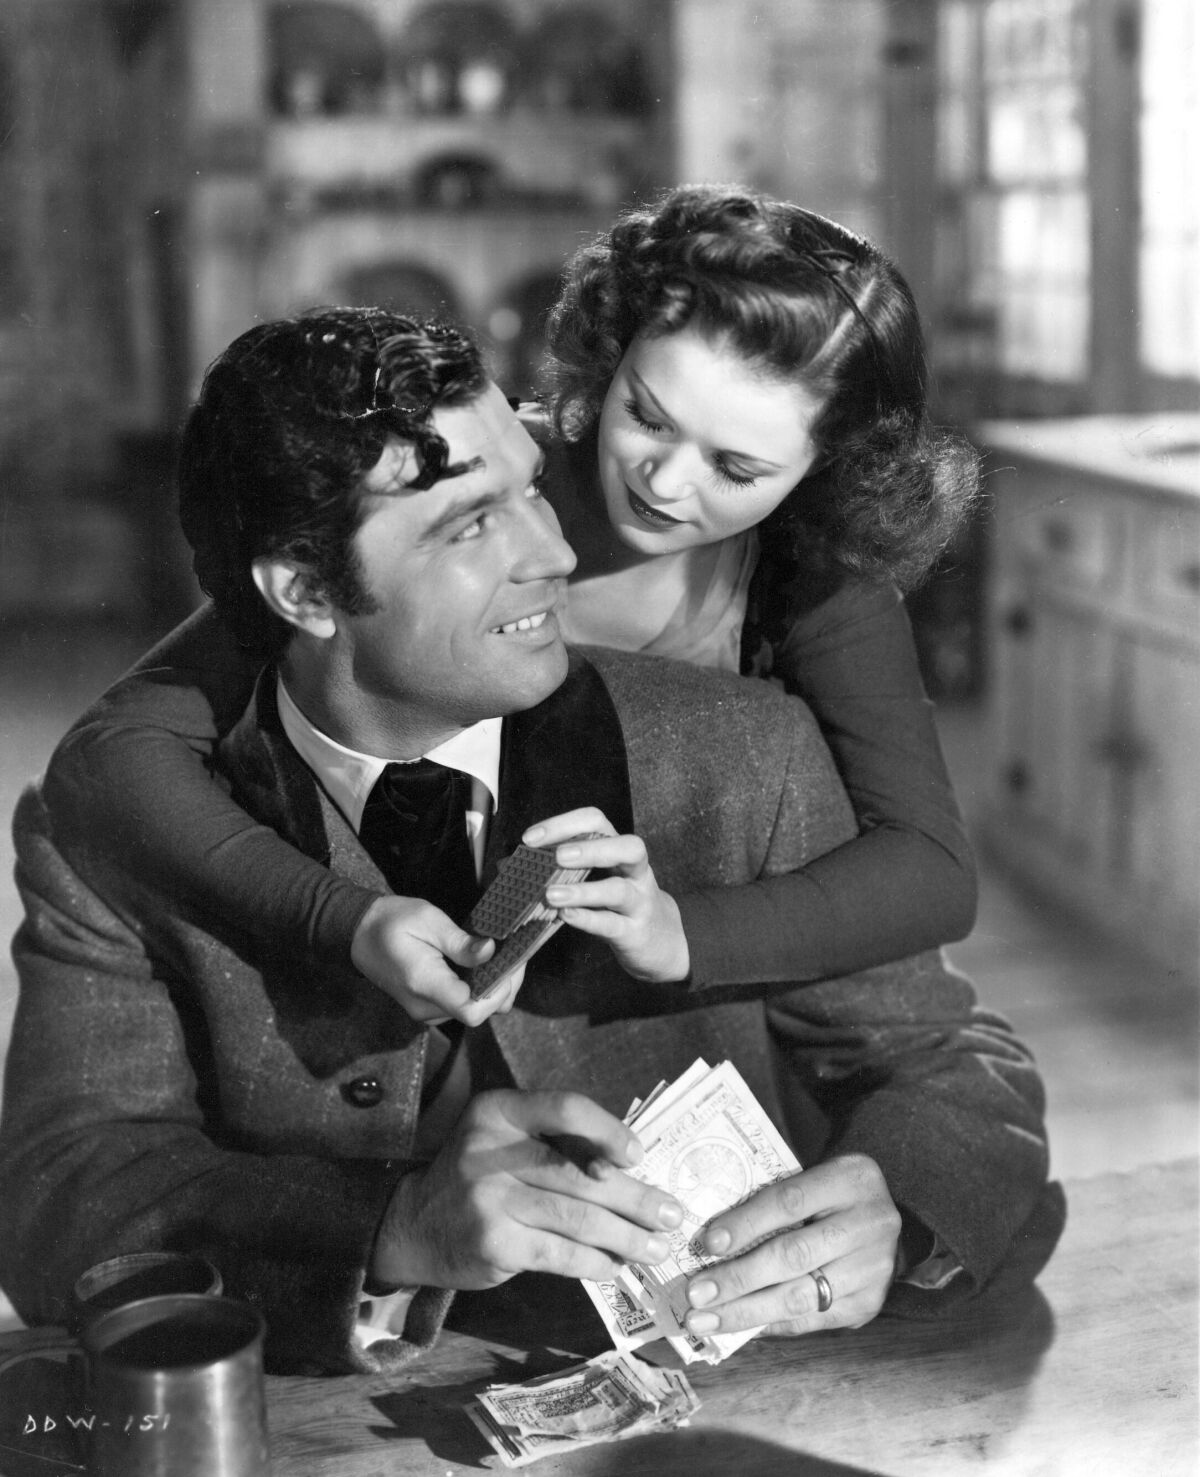 James Craig, left, and Simone Simon in 1941's "All That Money Can Buy" directed by William Dieterle.